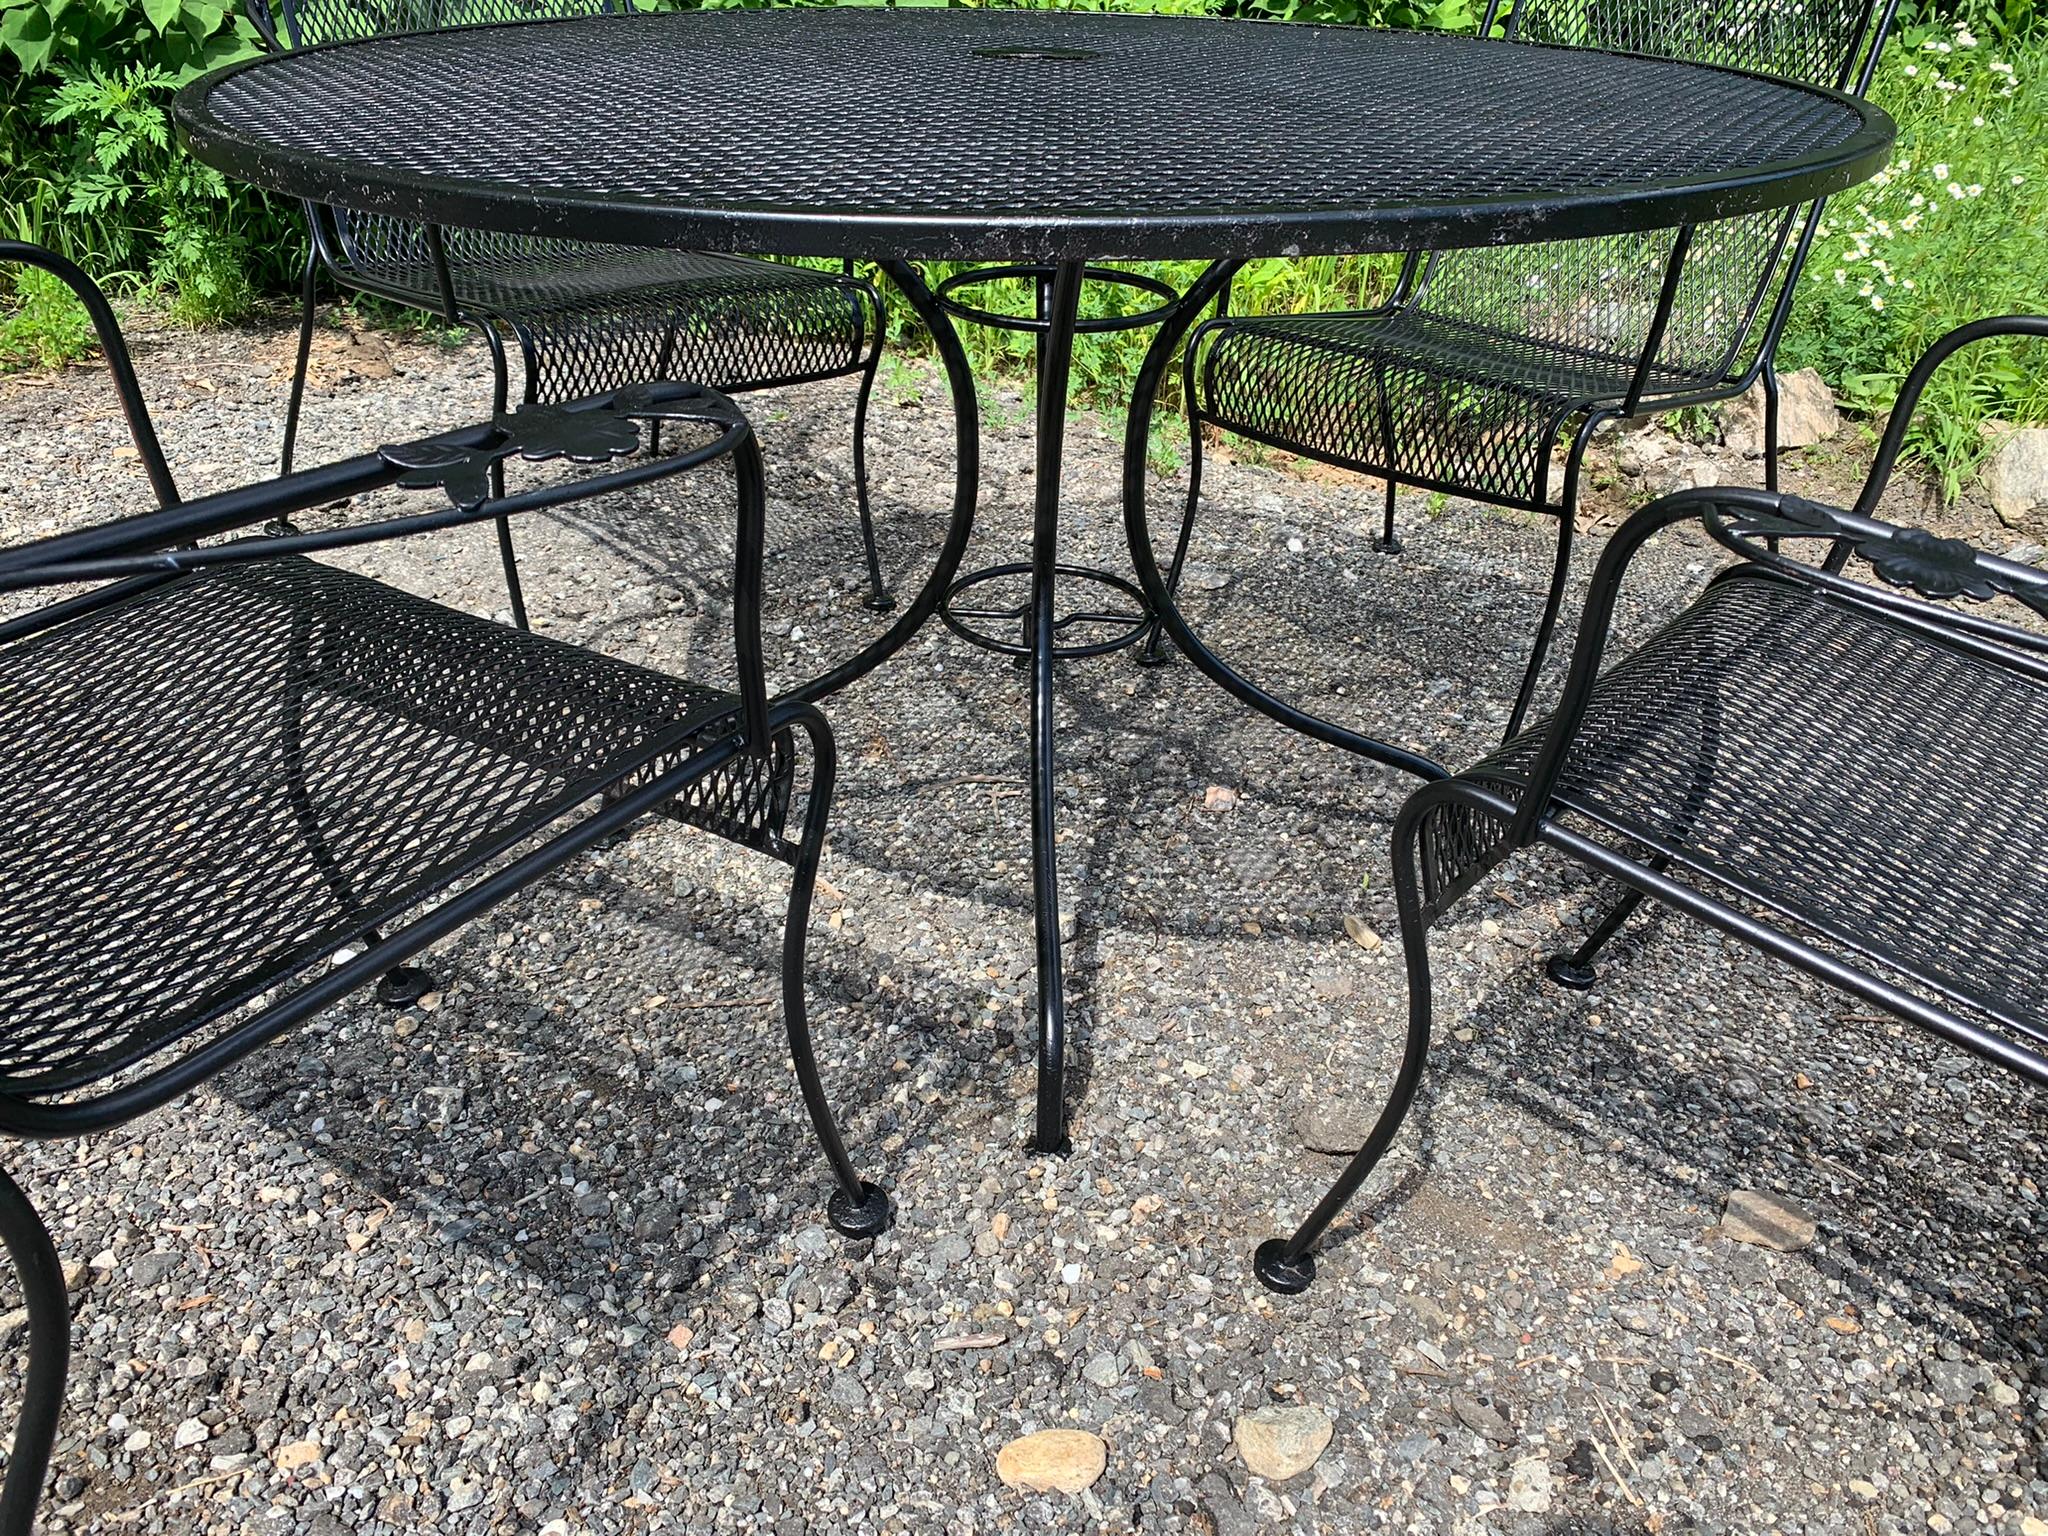 Vintage wrought iron seating - set of 4 chairs and 48” table

Woodard Salterini wrought iron pedestal table with removable top. Mesh chairs and table top. Perfect addition to any deck, garden, or patio. Sandblasting and powdercoating upon request.